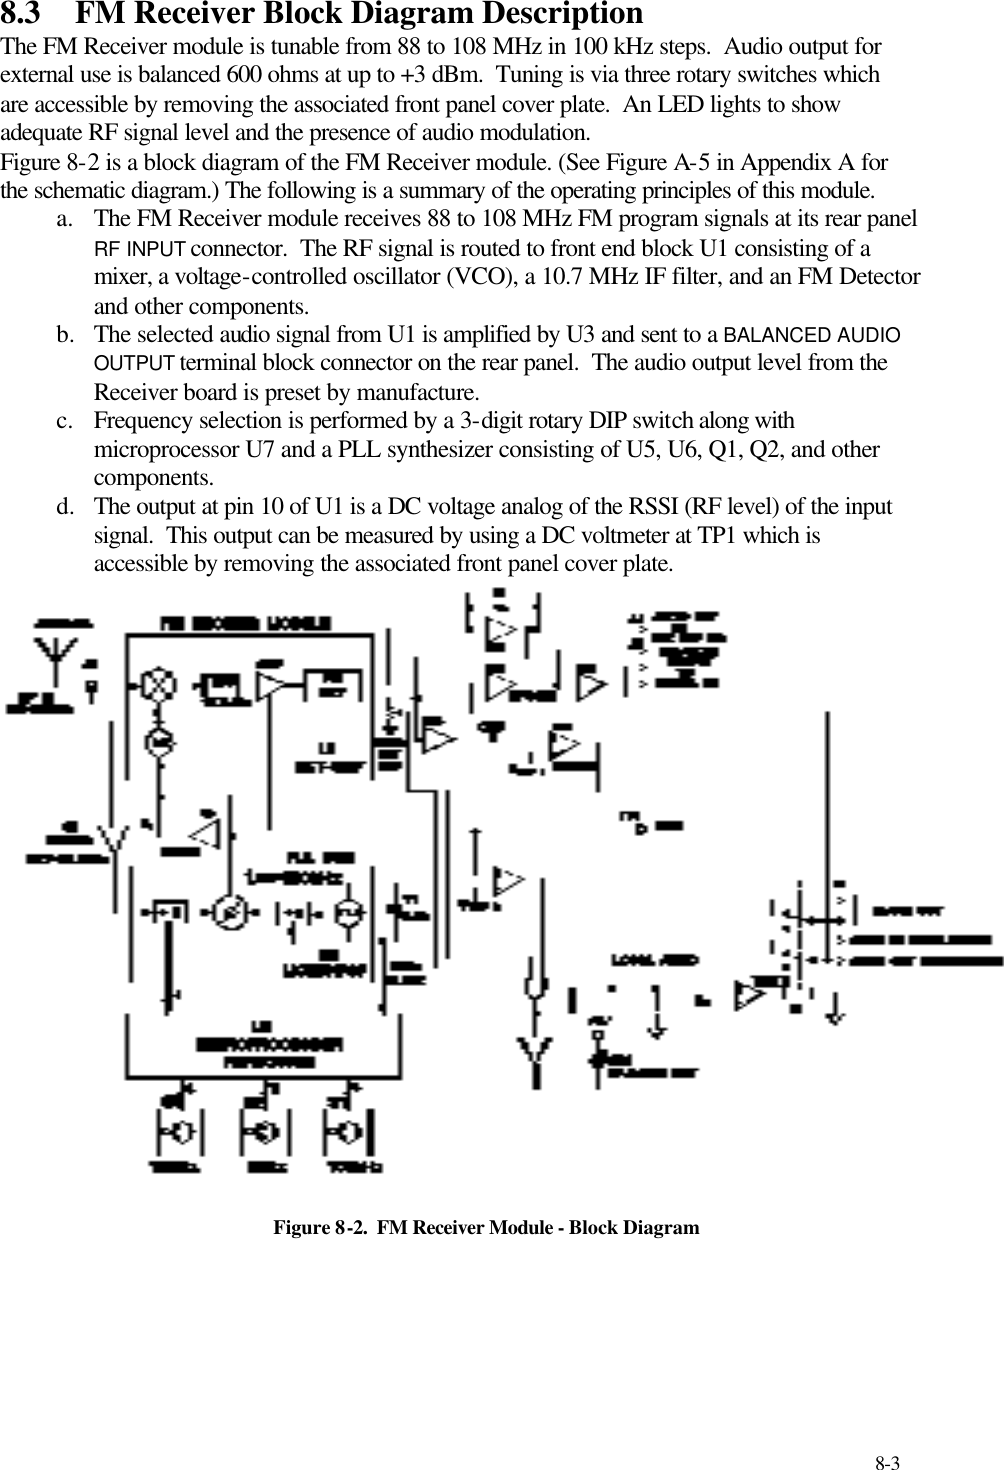     8-3 8.3 FM Receiver Block Diagram Description The FM Receiver module is tunable from 88 to 108 MHz in 100 kHz steps.  Audio output for external use is balanced 600 ohms at up to +3 dBm.  Tuning is via three rotary switches which are accessible by removing the associated front panel cover plate.  An LED lights to show adequate RF signal level and the presence of audio modulation. Figure 8-2 is a block diagram of the FM Receiver module. (See Figure A-5 in Appendix A for the schematic diagram.) The following is a summary of the operating principles of this module. a. The FM Receiver module receives 88 to 108 MHz FM program signals at its rear panel RF INPUT connector.  The RF signal is routed to front end block U1 consisting of a mixer, a voltage-controlled oscillator (VCO), a 10.7 MHz IF filter, and an FM Detector and other components. b.  The selected audio signal from U1 is amplified by U3 and sent to a BALANCED AUDIO OUTPUT terminal block connector on the rear panel.  The audio output level from the Receiver board is preset by manufacture. c. Frequency selection is performed by a 3-digit rotary DIP switch along with microprocessor U7 and a PLL synthesizer consisting of U5, U6, Q1, Q2, and other components. d.  The output at pin 10 of U1 is a DC voltage analog of the RSSI (RF level) of the input signal.  This output can be measured by using a DC voltmeter at TP1 which is accessible by removing the associated front panel cover plate.      Figure 8-2.  FM Receiver Module - Block Diagram     